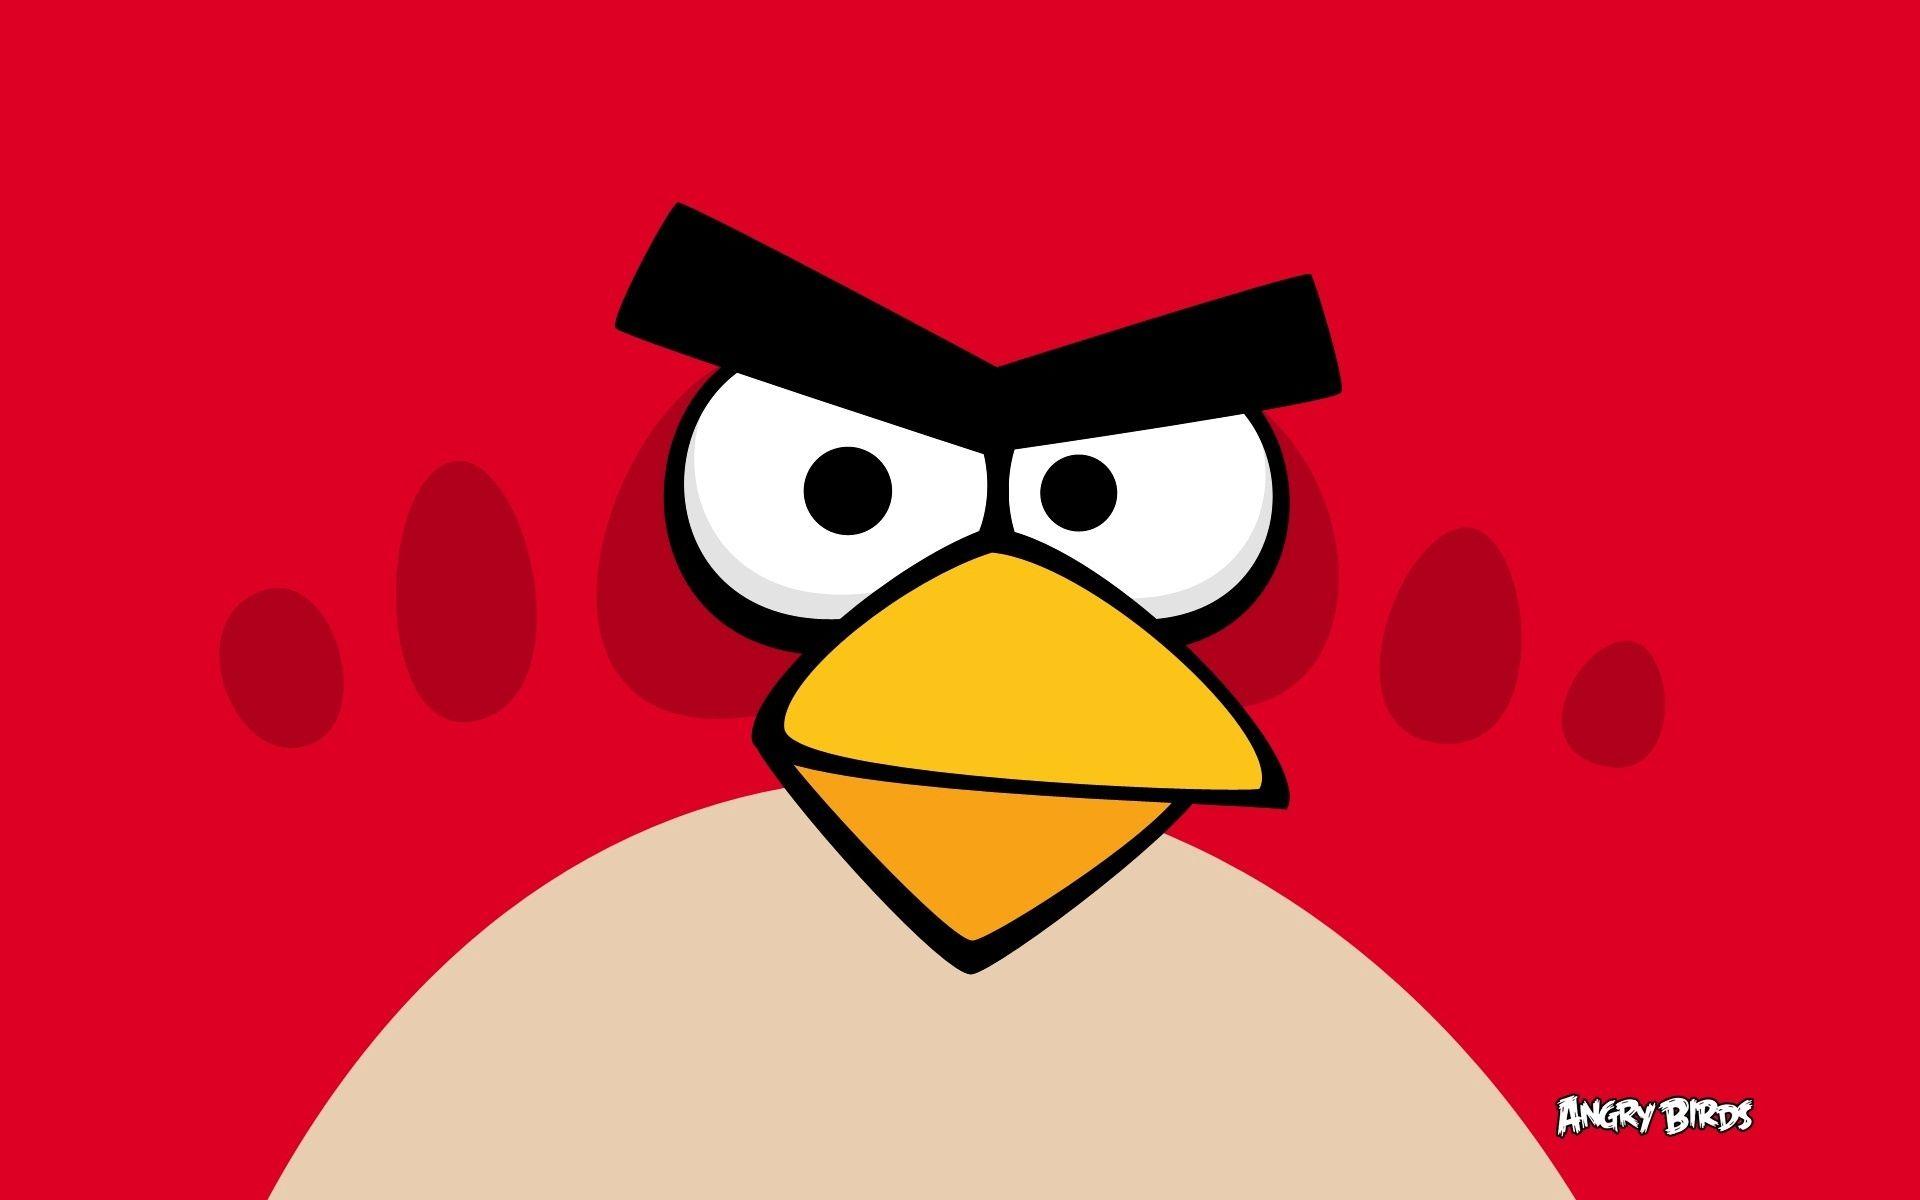 Angry Birds Wallpaper HD wallpaper search